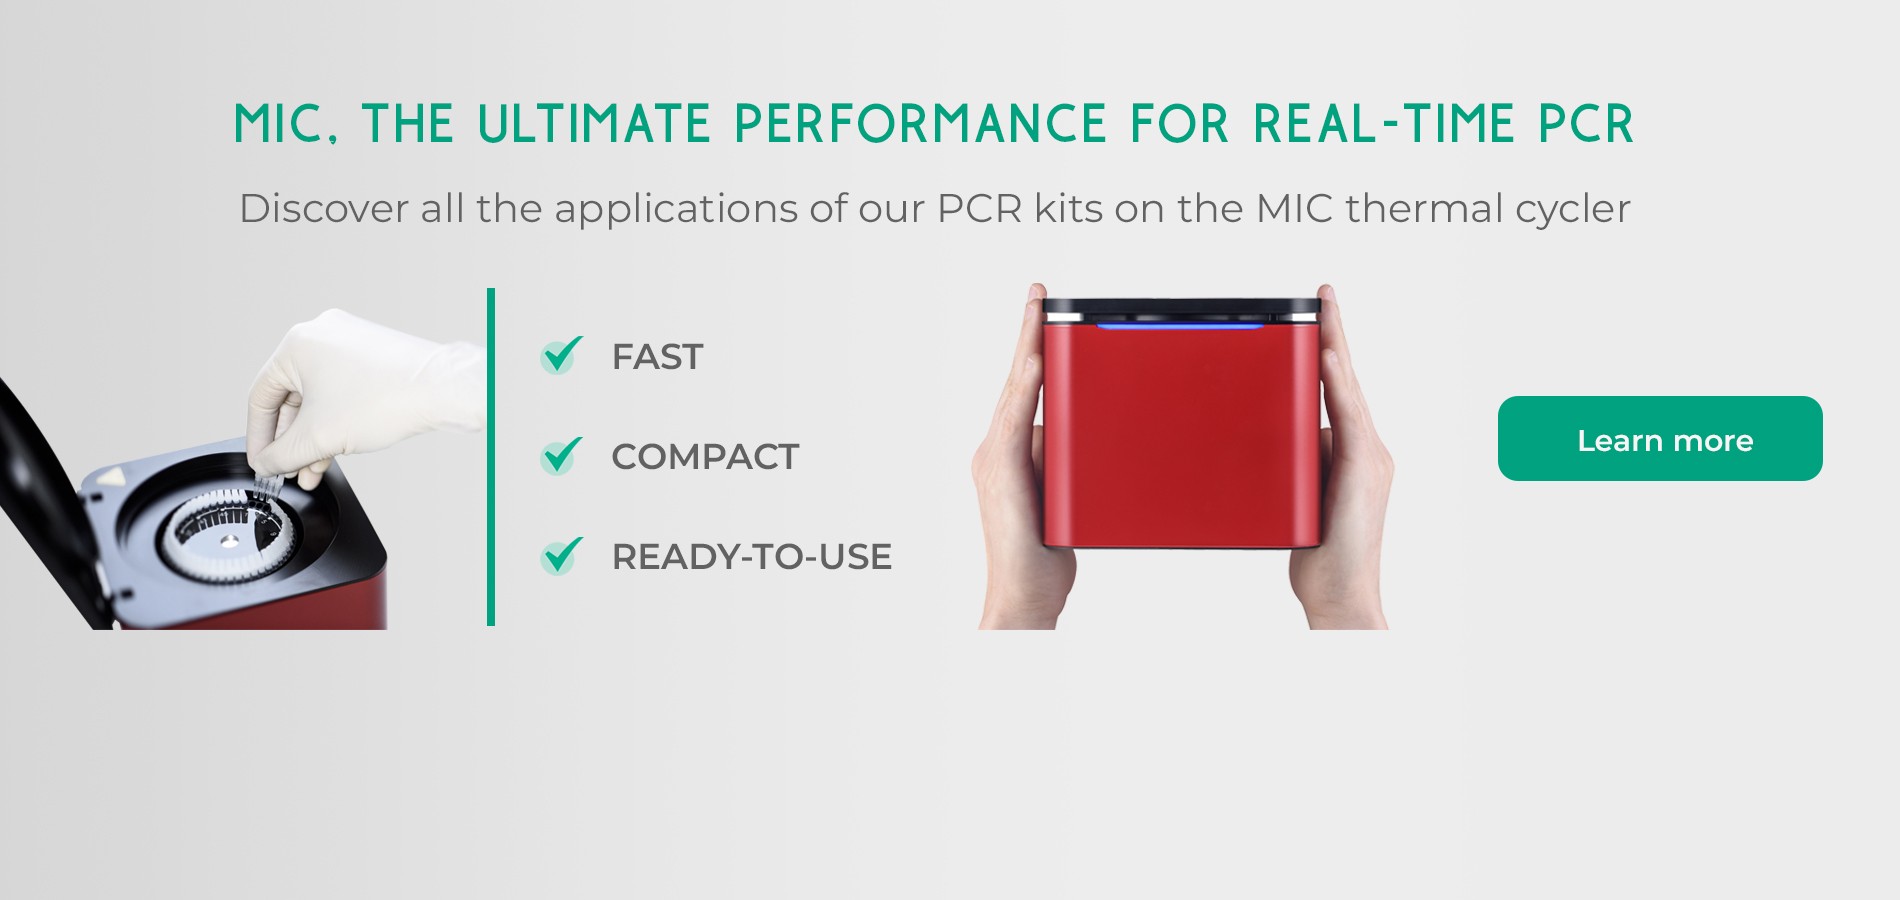 Discover all the application of our PCR kits on the MIC thermal cycler